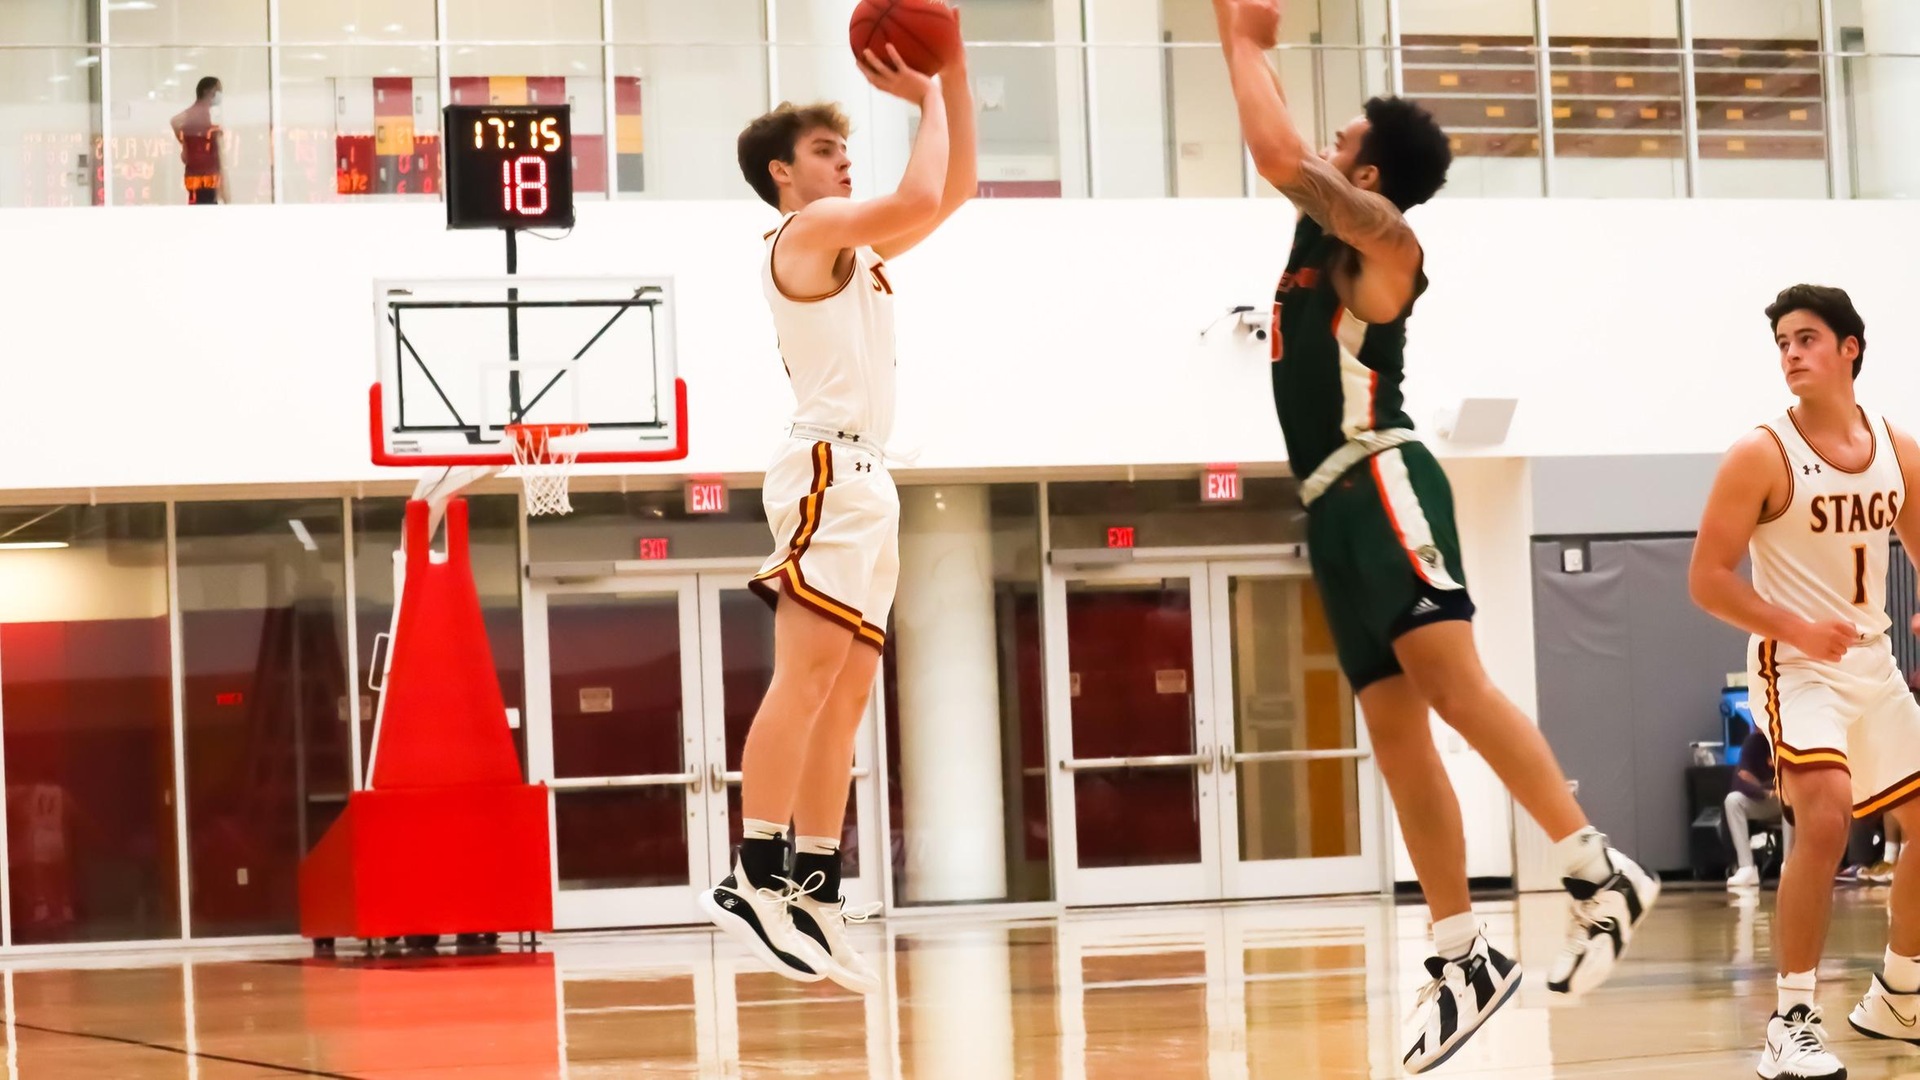 Josh Angle recorded a team-high 25 points in a 86-59 win over Whittier.